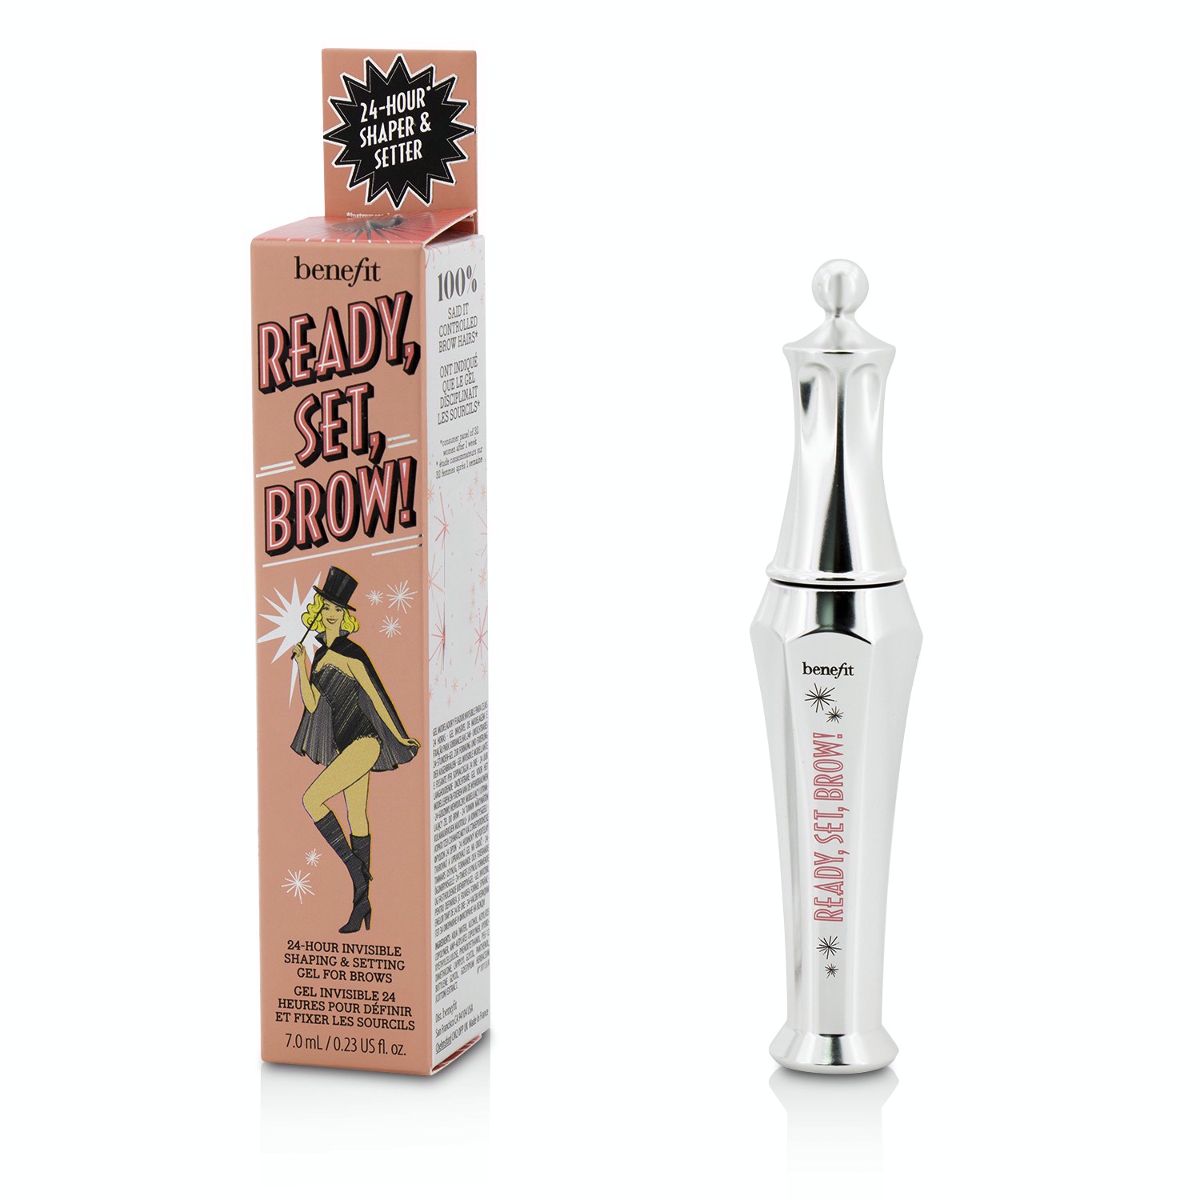 Ready Set Brow (24 Hour Invisible Shaping  Setting Clear Gel For Brows) Benefit Image